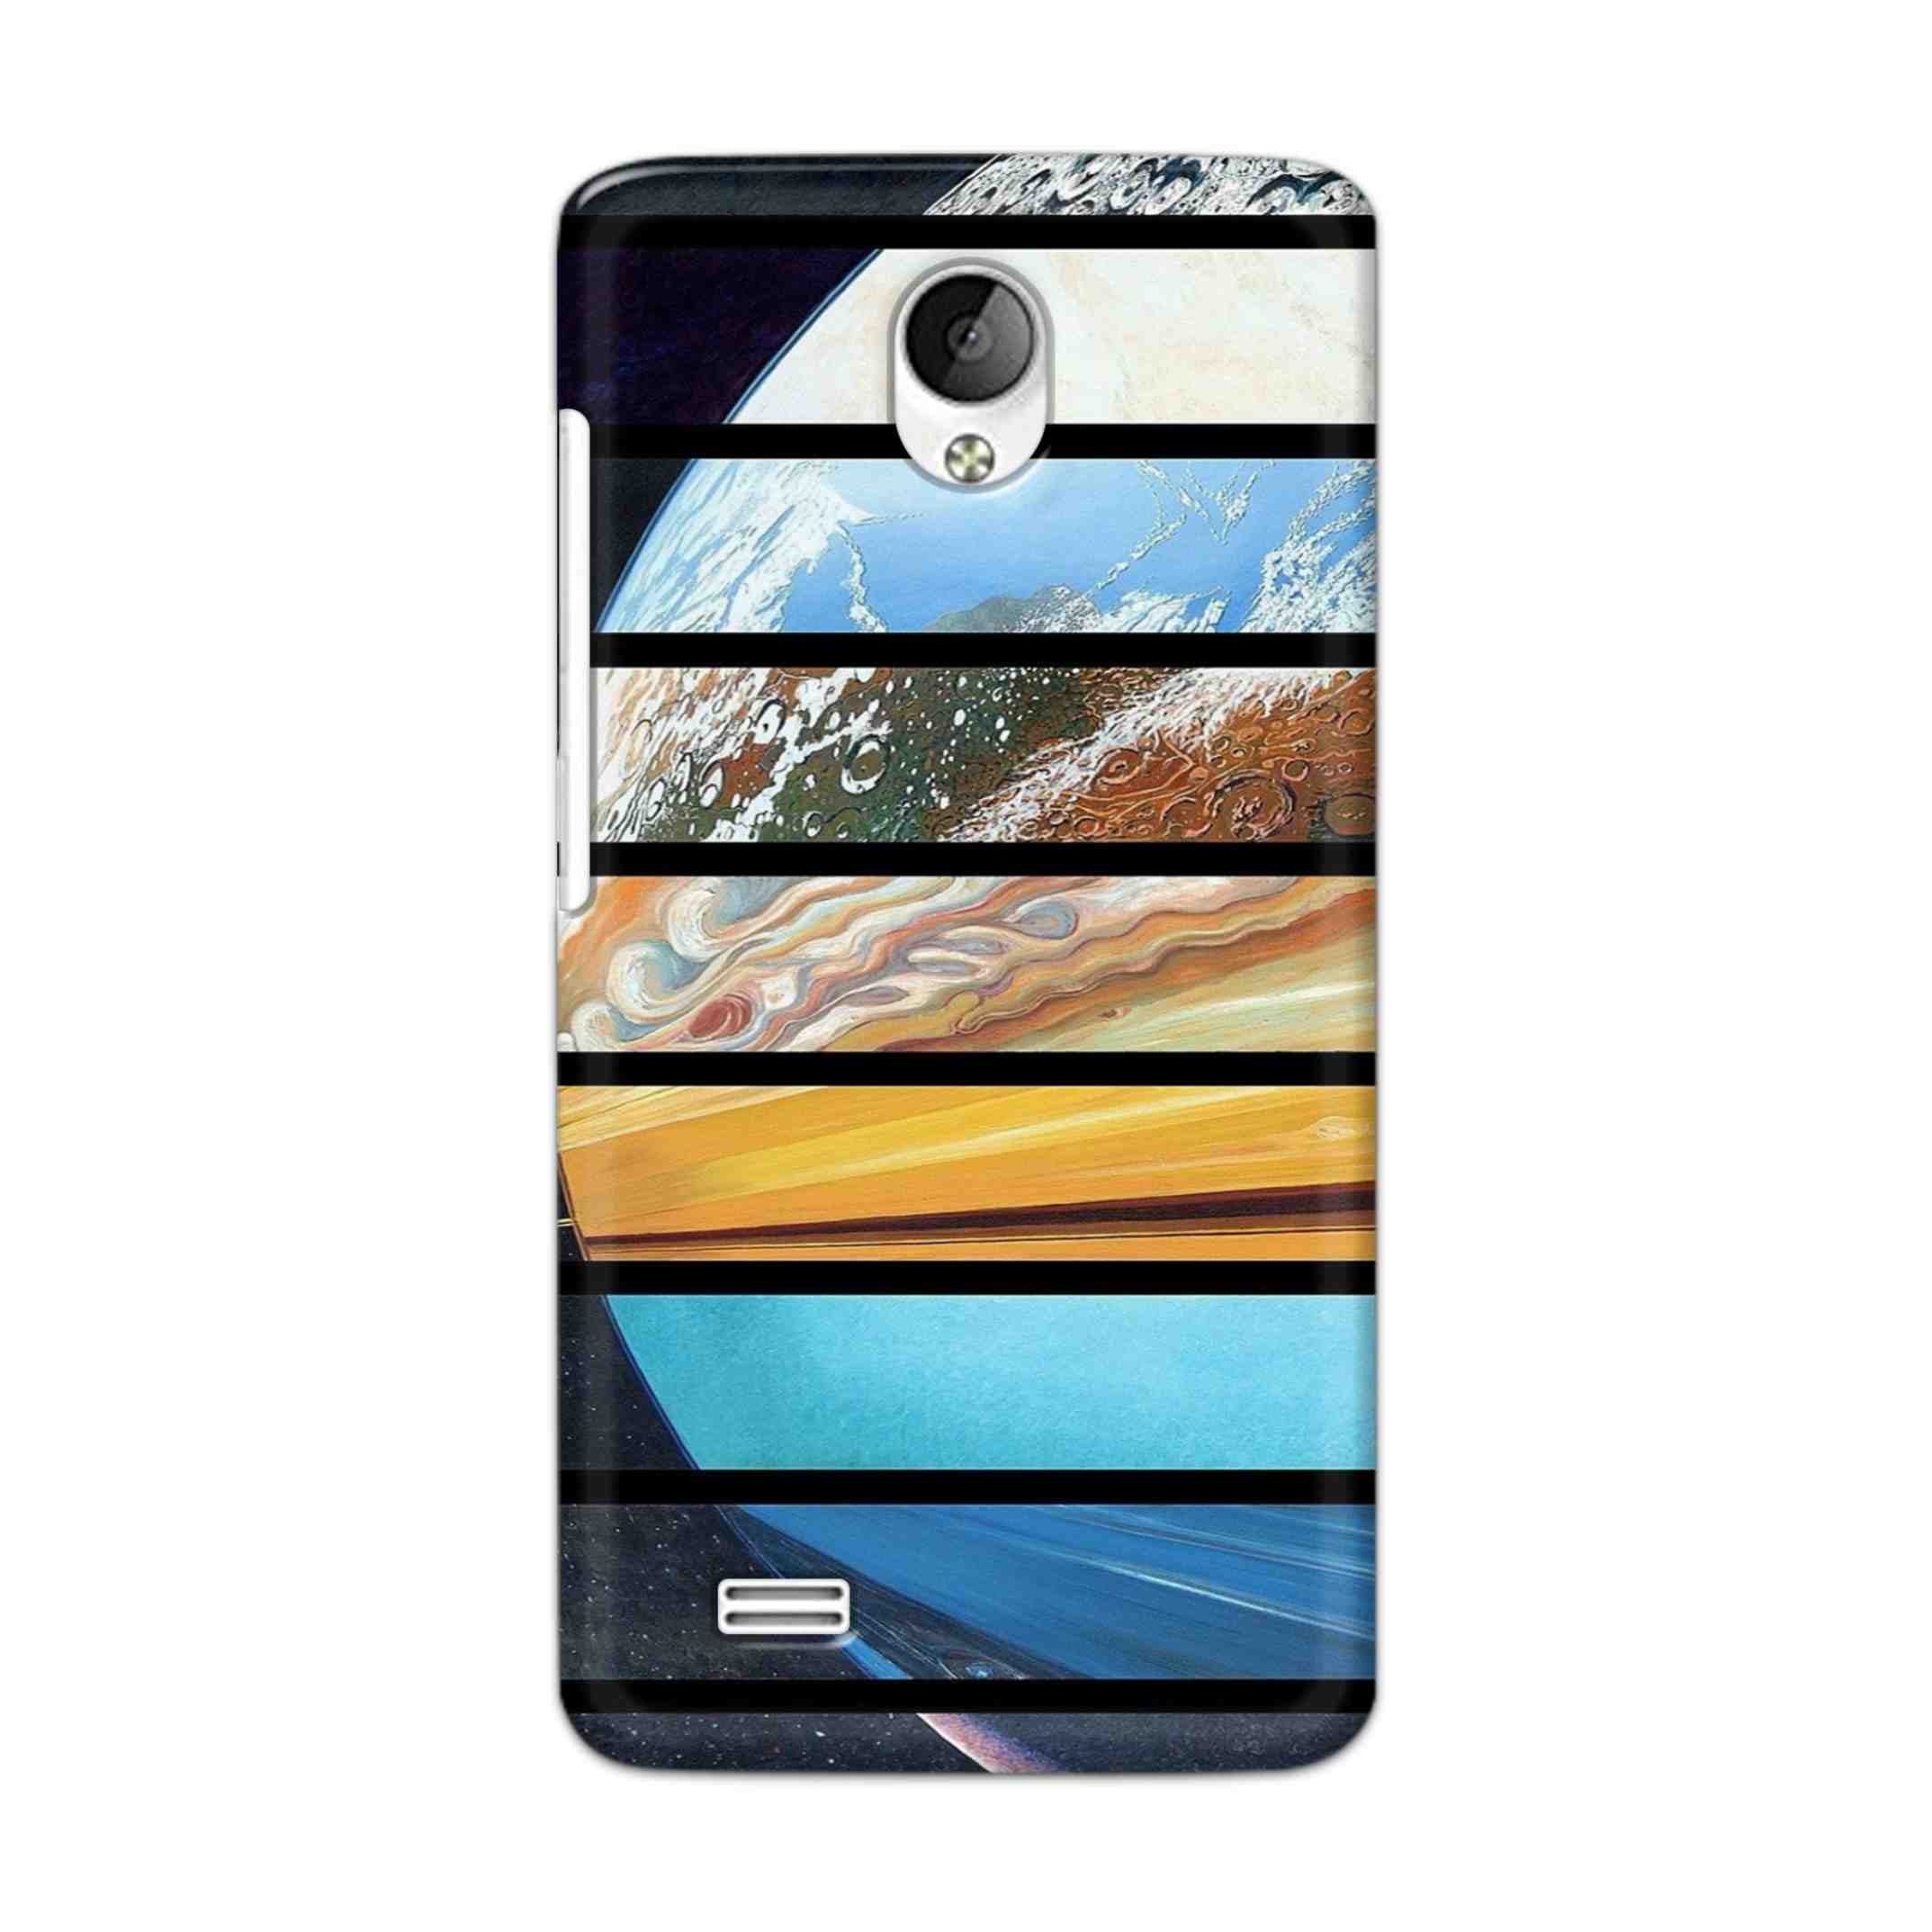 Buy Colourful Earth Hard Back Mobile Phone Case Cover For Vivo Y21 / Vivo Y21L Online